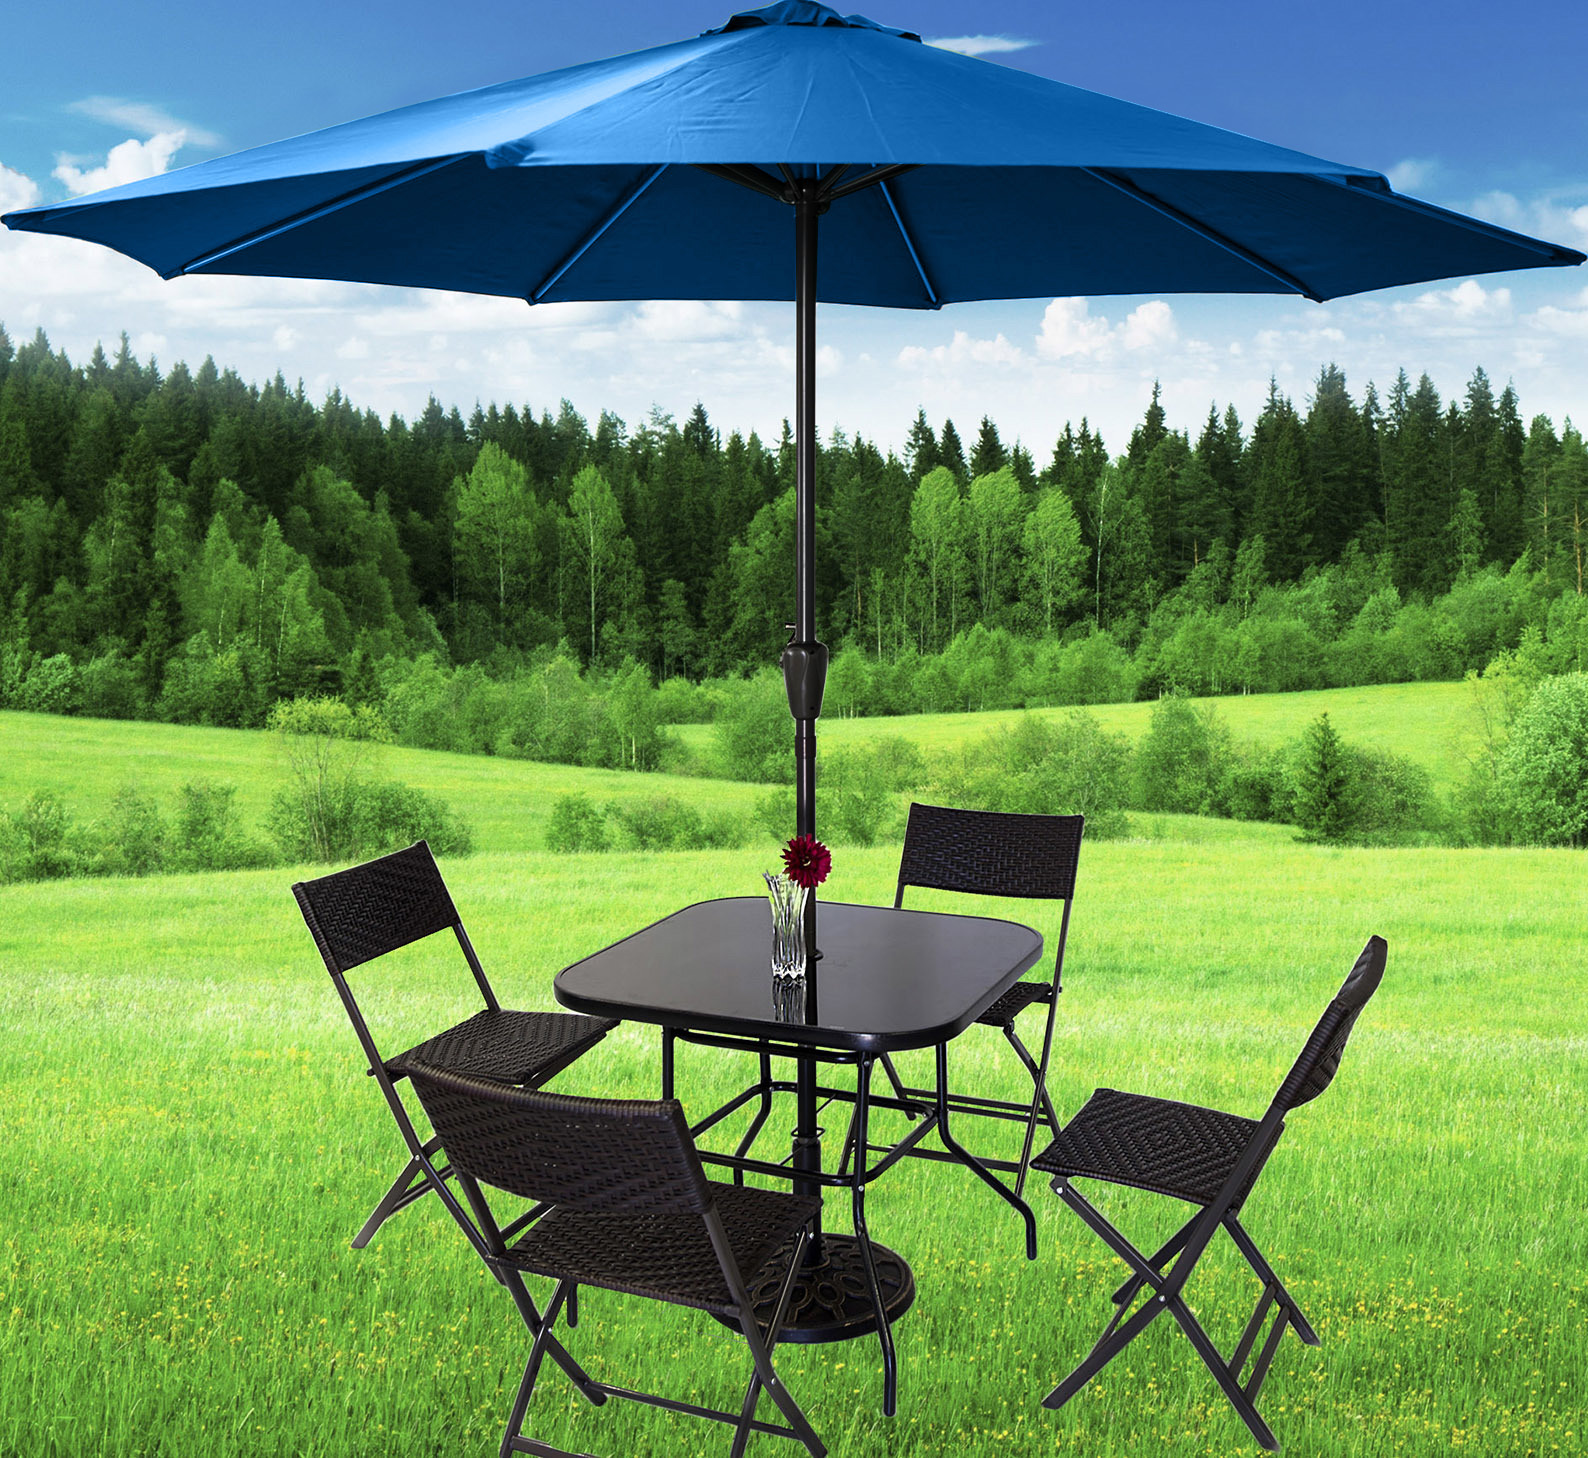 Alfresco 7 Piece Outdoor Setting (Blue Umbrella & Stand, 4 Rattan Chairs, Square Table)